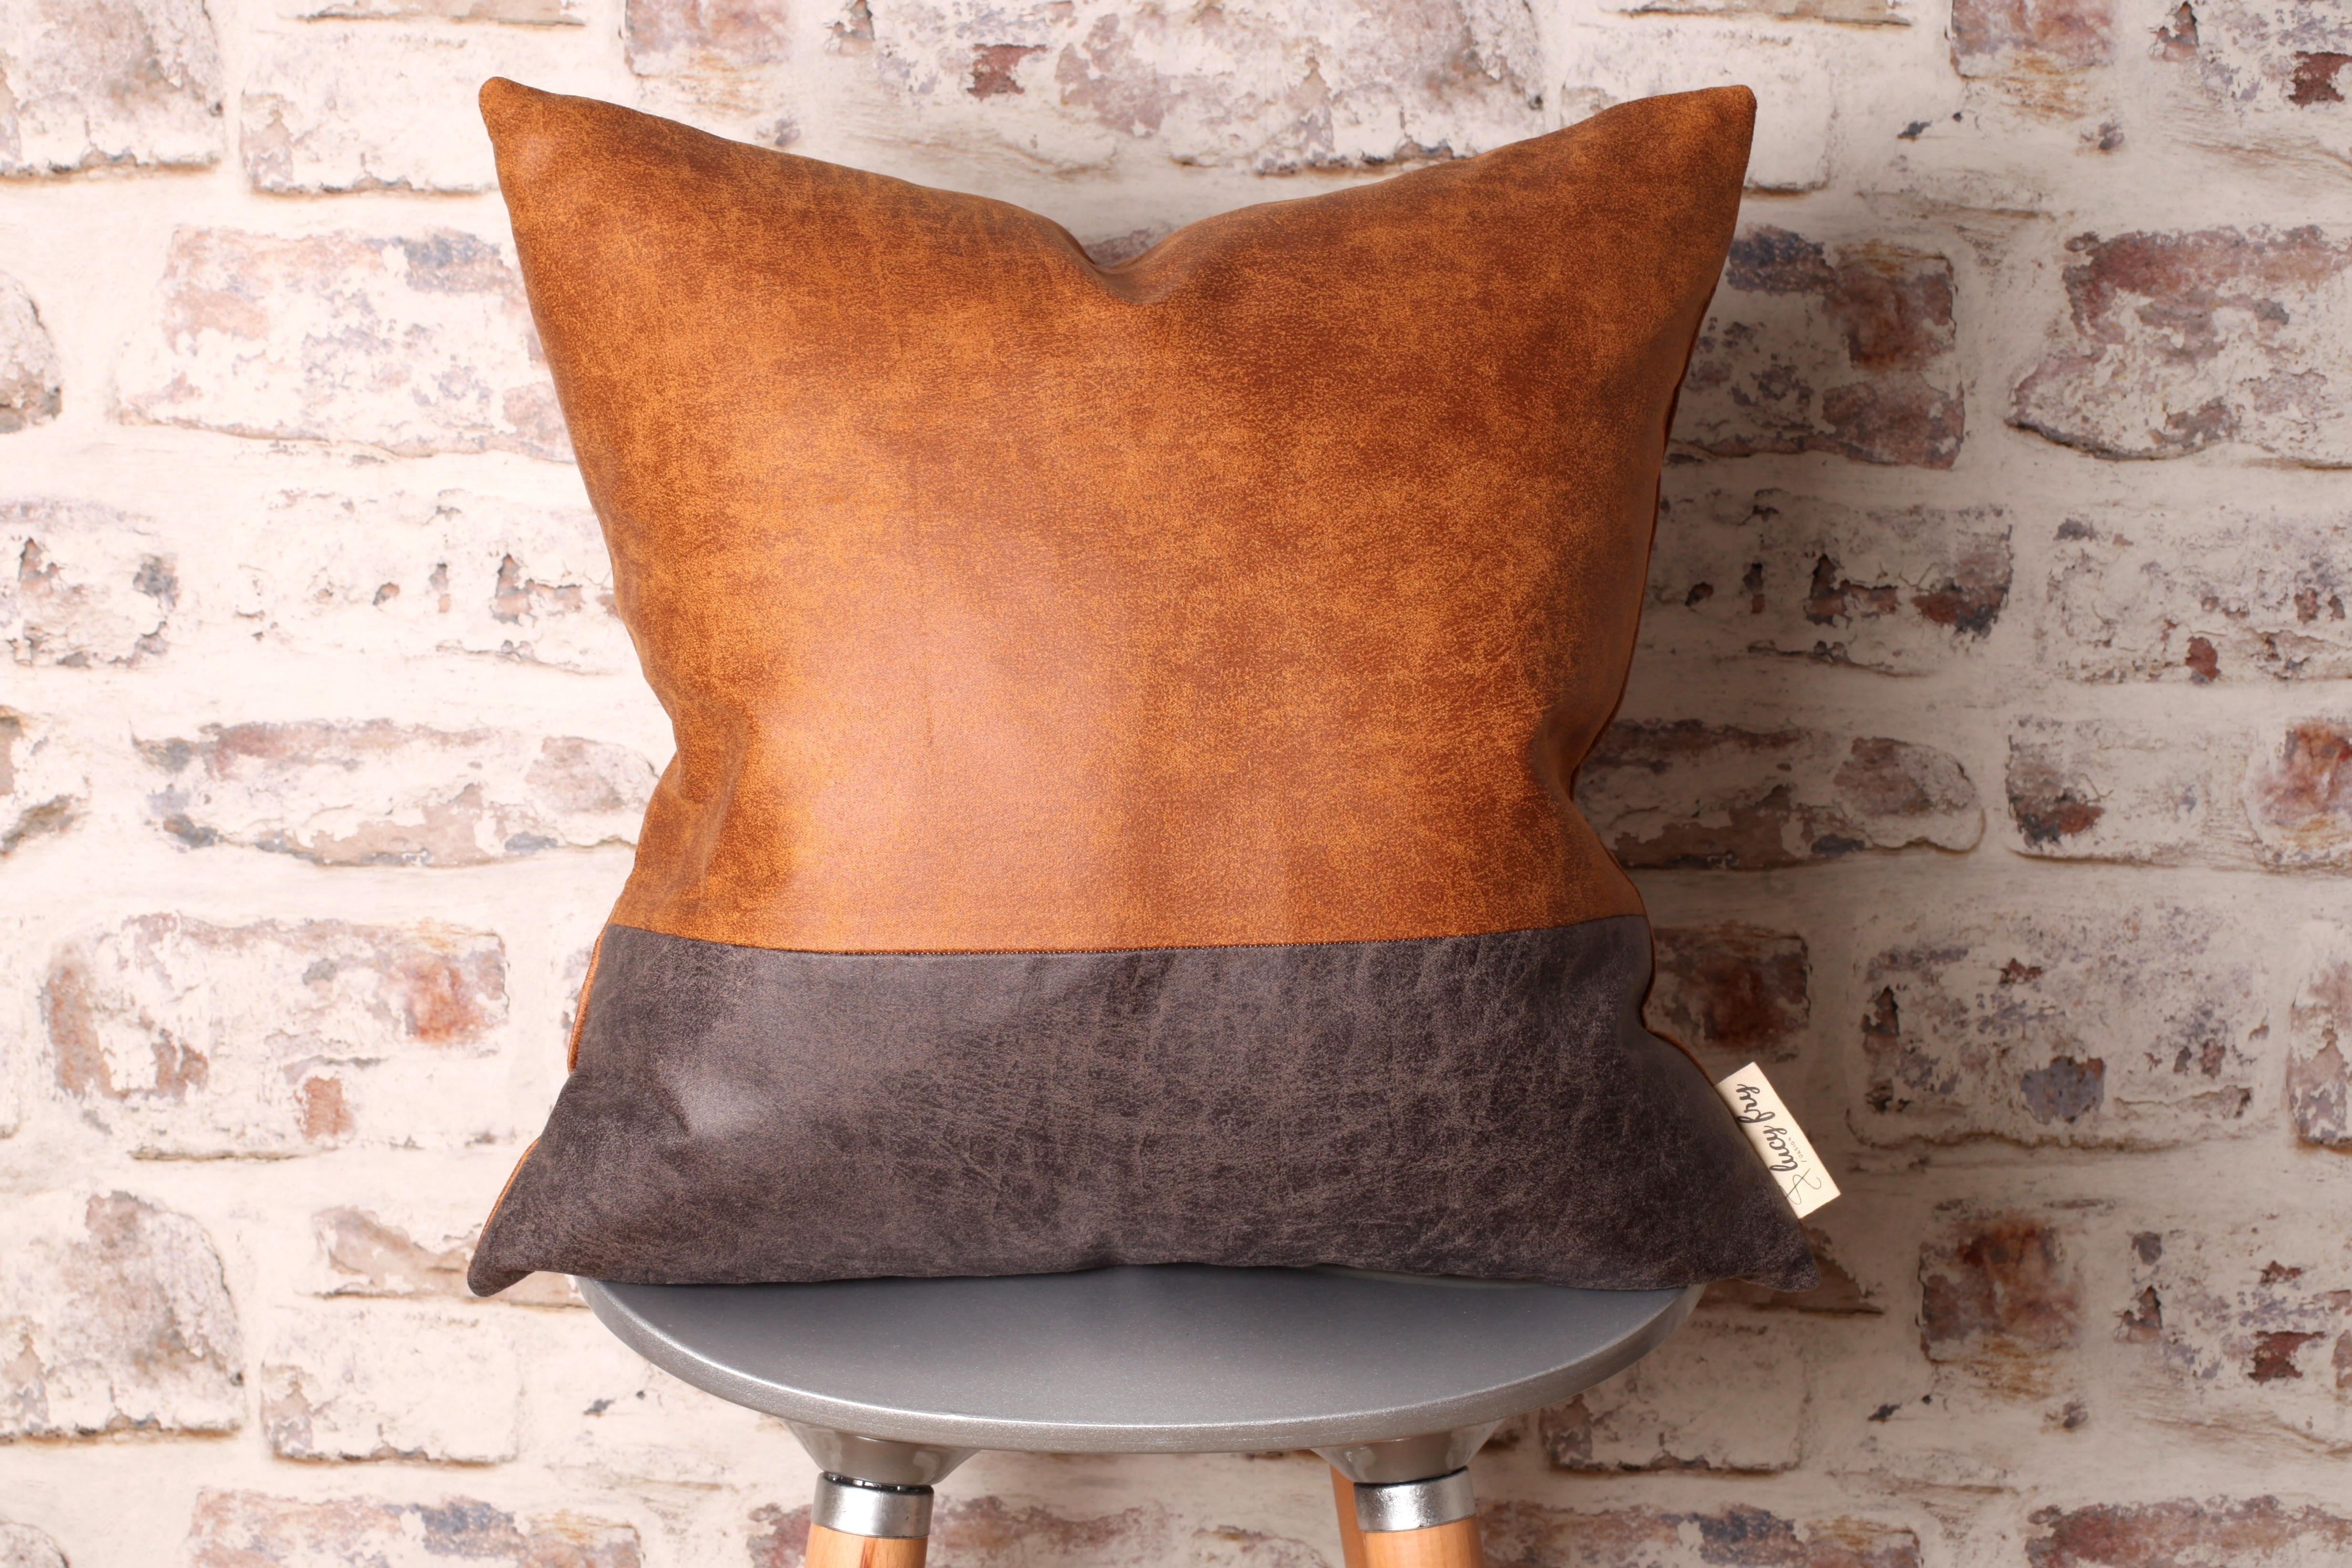 Steel Grey Faux Leather Cushion, Brown Leather Pillow